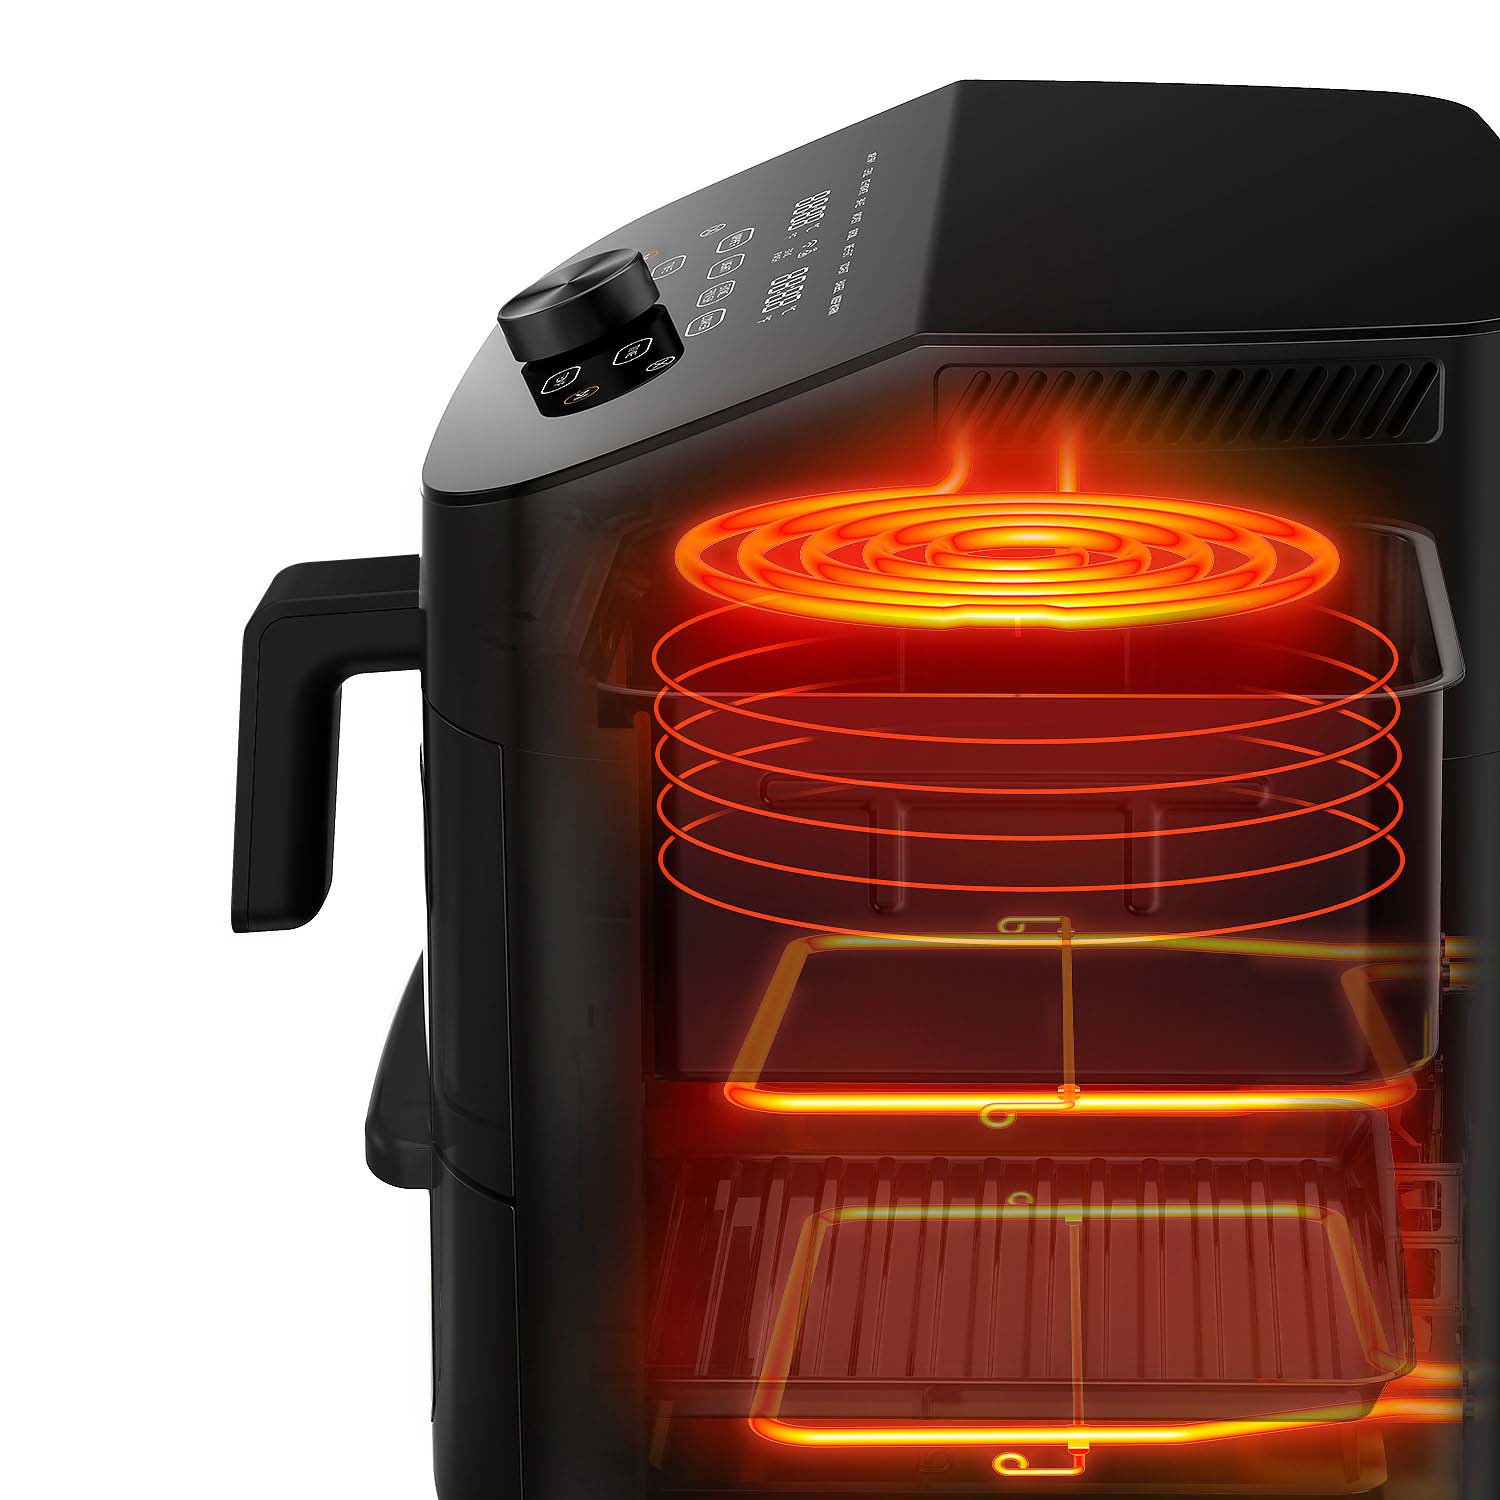 8-In-1 Midea 11QT Two-Zone Air Fryer Oven